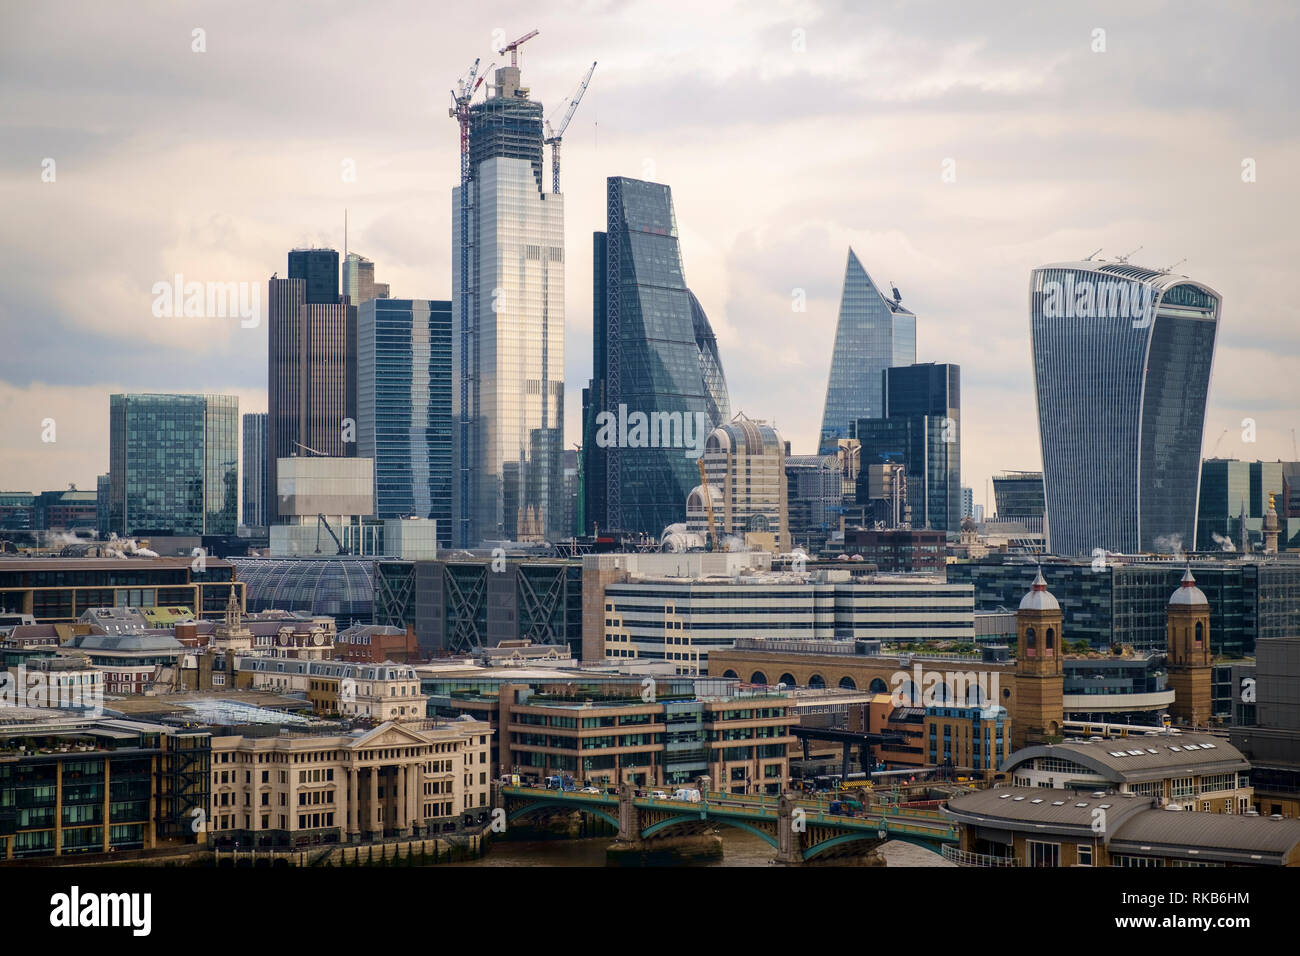 London skyline 2019, with The Walkie -Talkie building, The Cheesegrater and 22 Bishopsgate under construction. Stock Photo